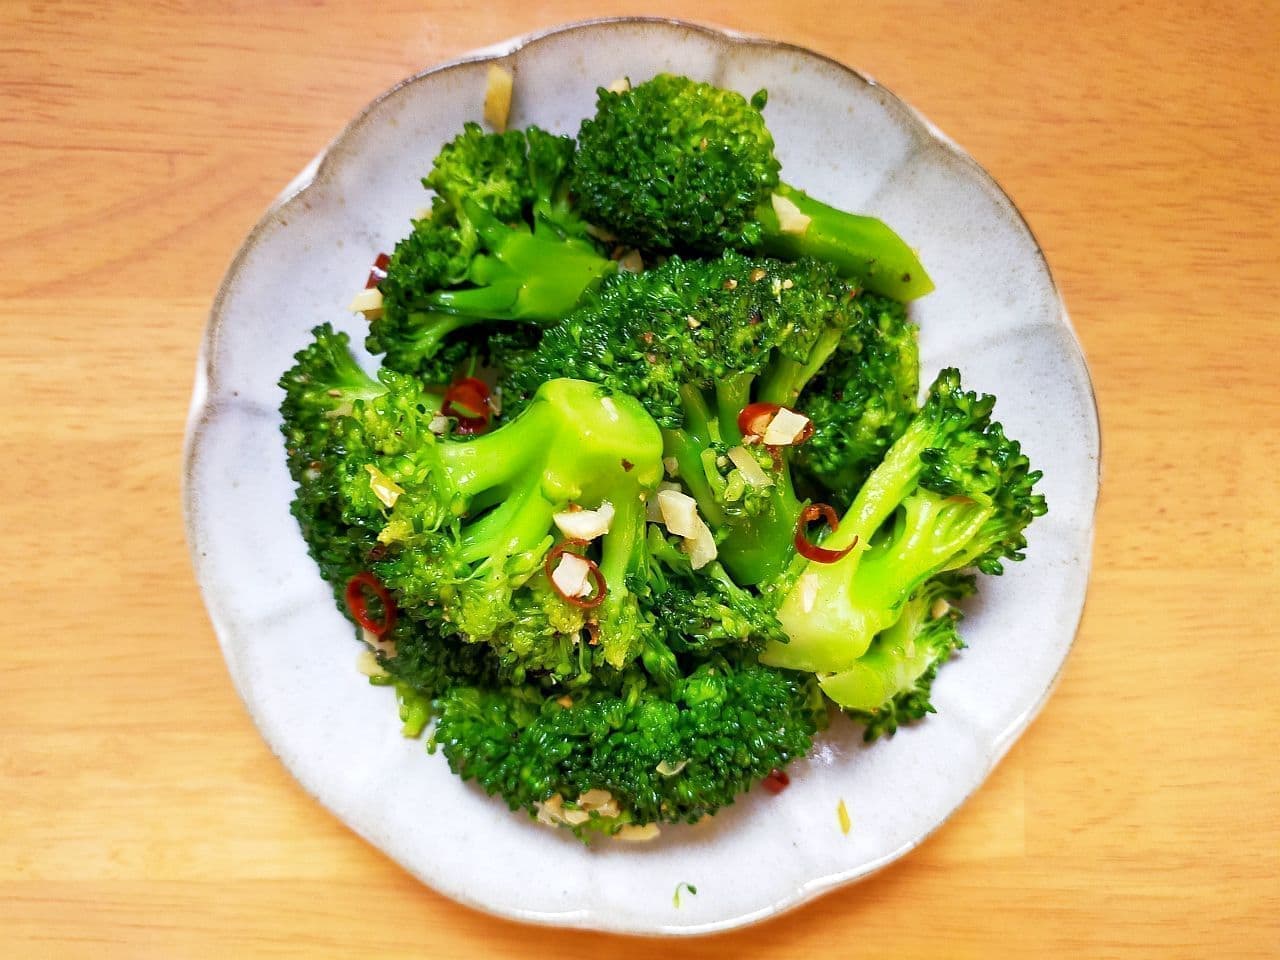 Recipe for "Stir-Fried Broccoli with Peperoncino